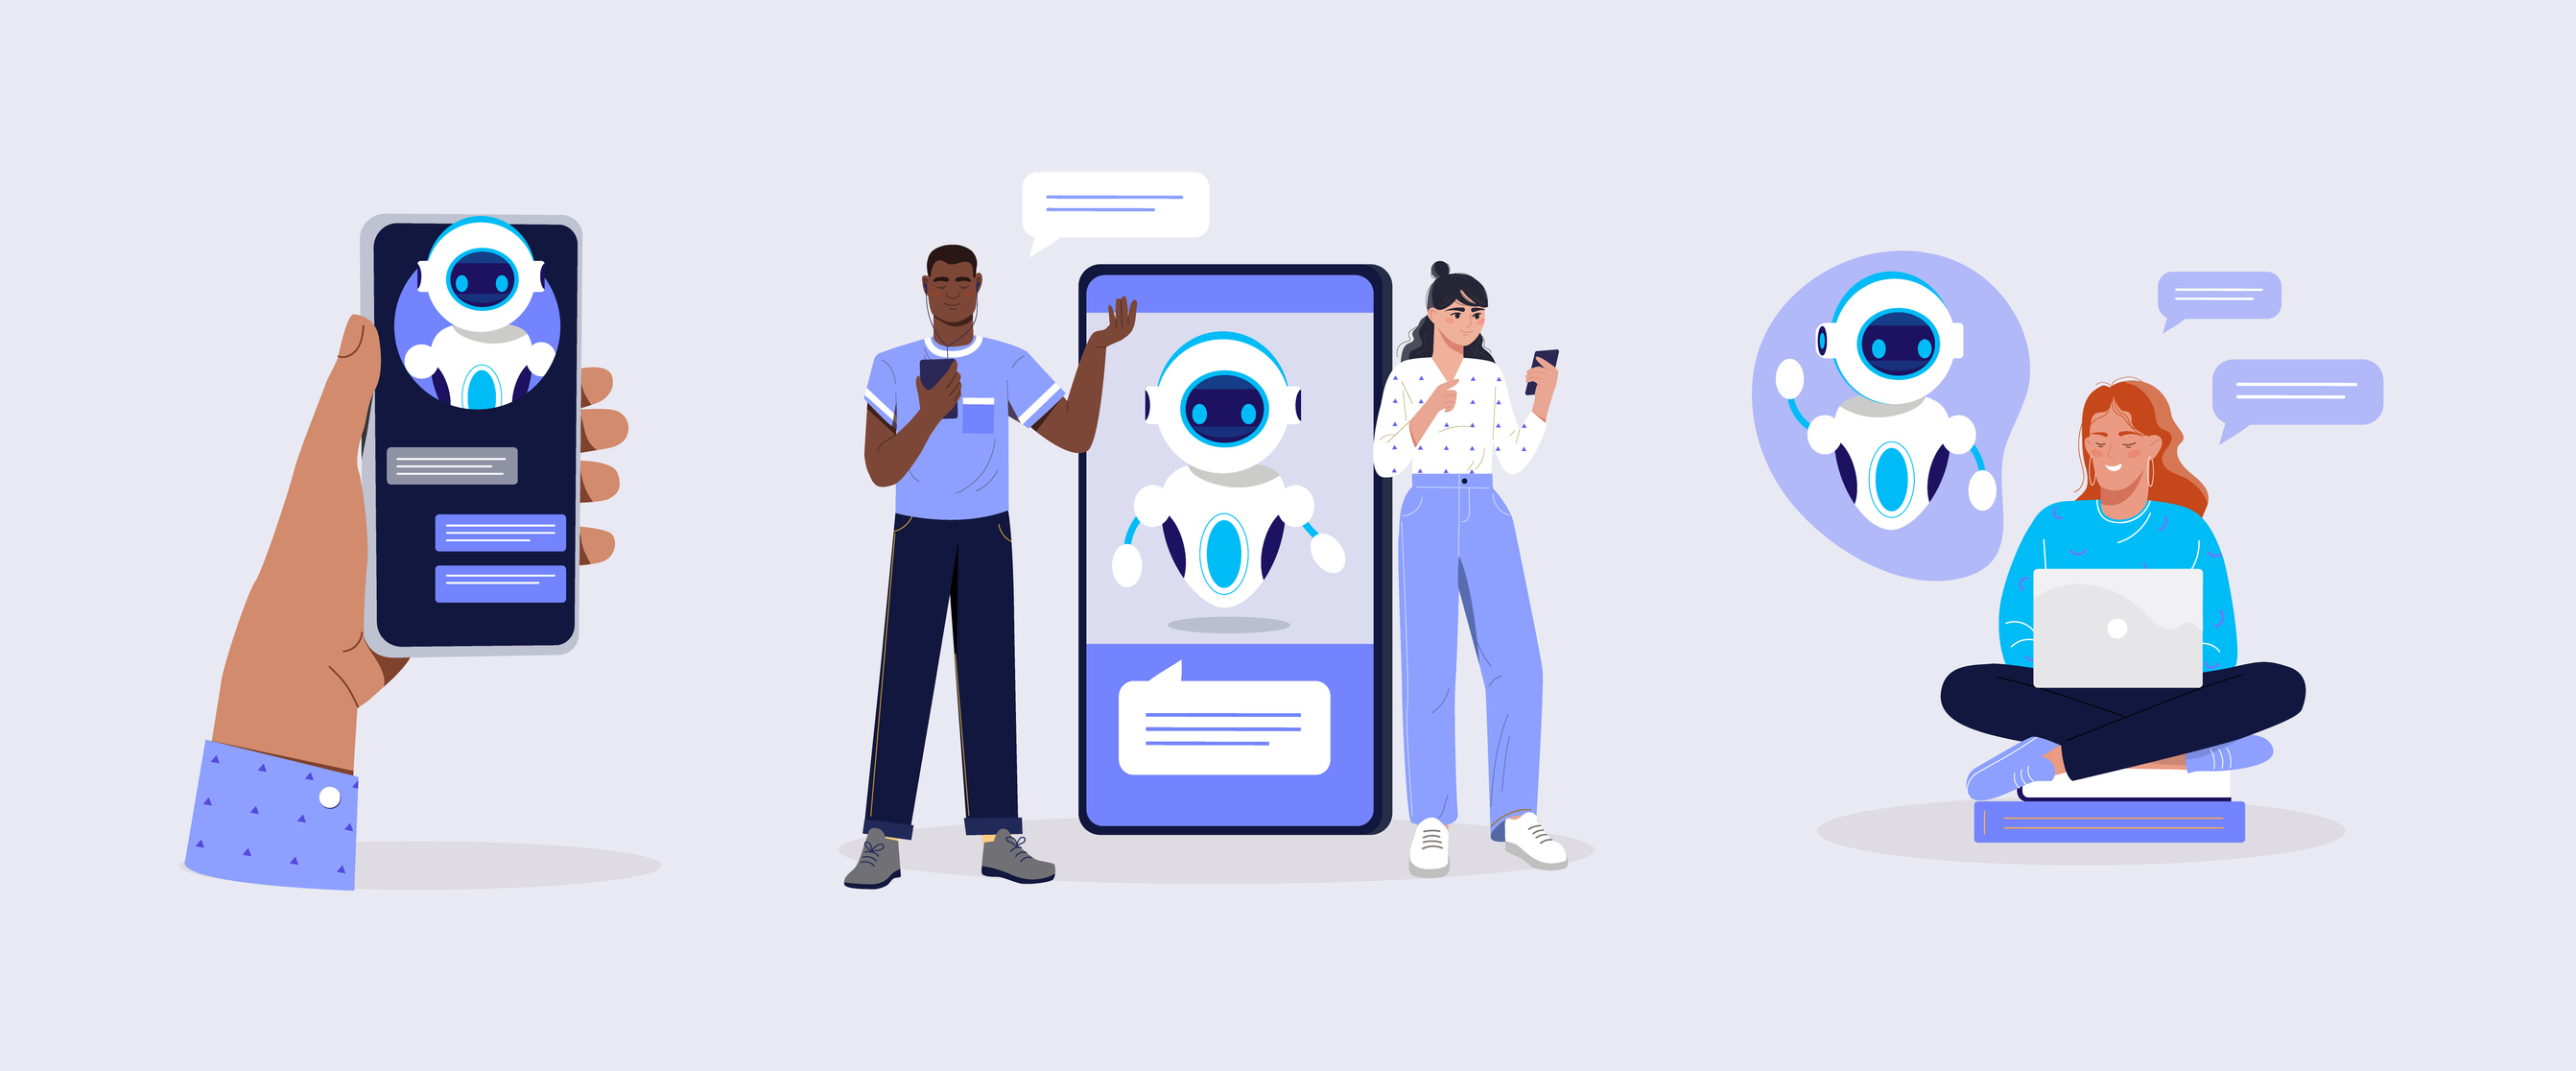 AI chatbot compared with virtual assistants